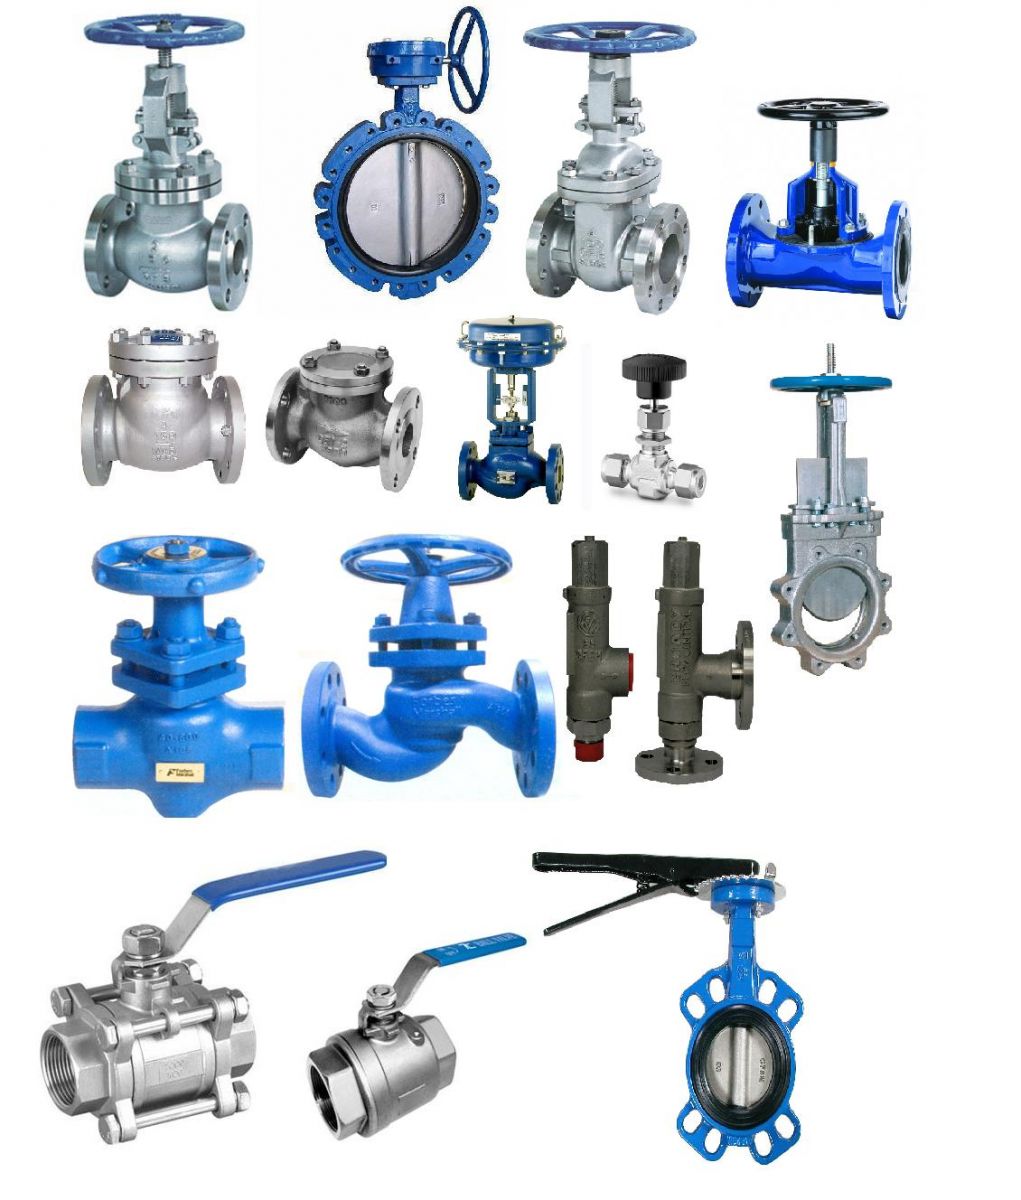 Three Policies Boost the Development of Valve Industry